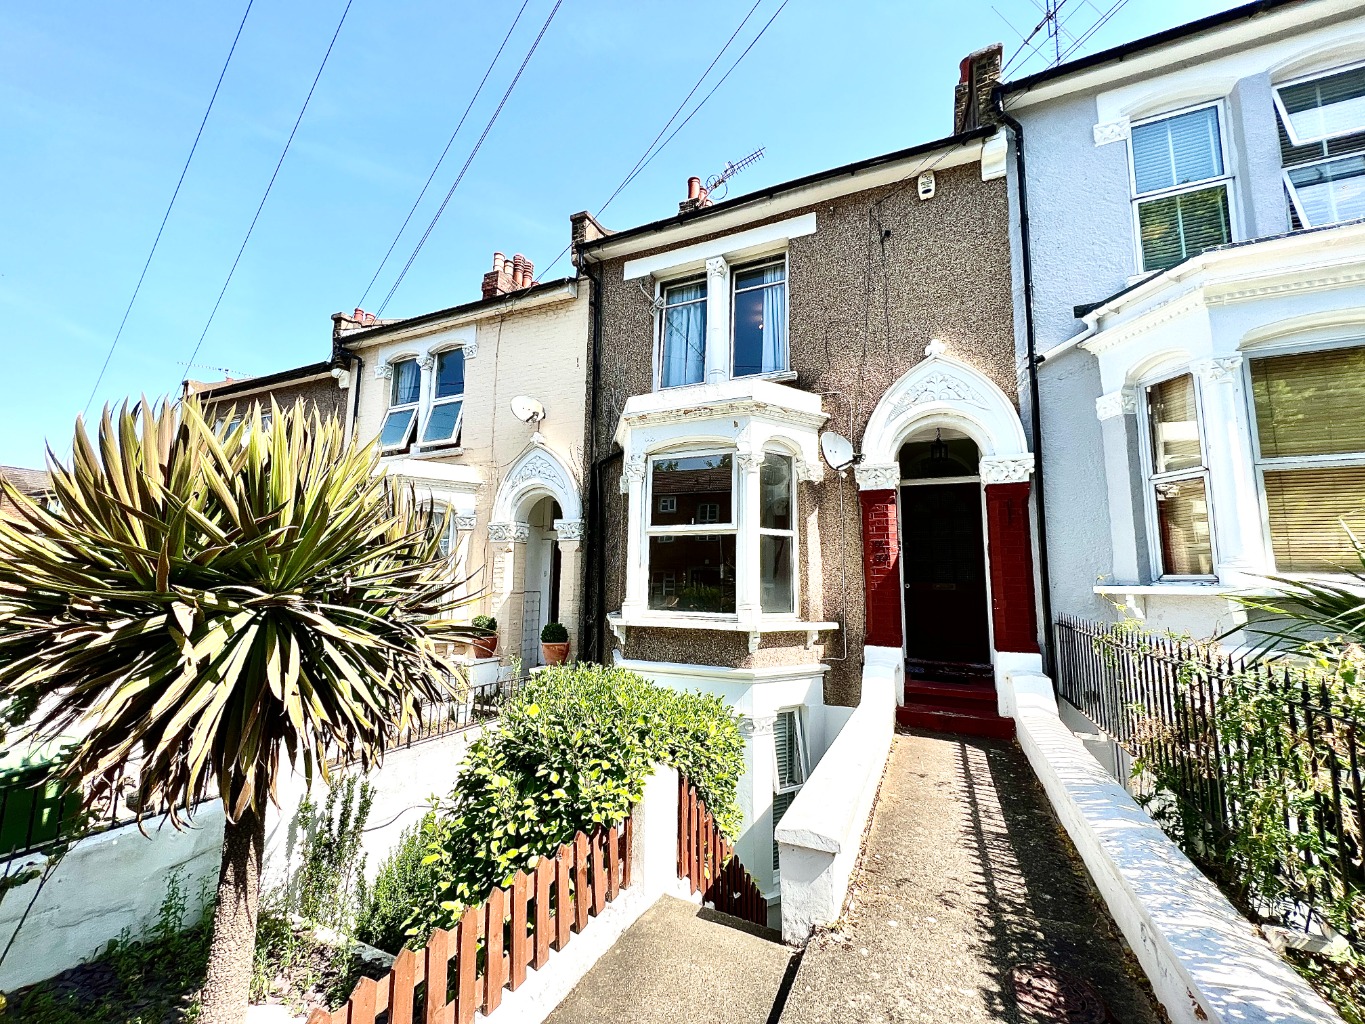 Beaumont Gibbs are delighted to offer this beautiful one bedroom lower ground floor maisonette to let in Ripon Road, Shooters Hill, SE18. The property is offered on an unfurnished basis and available from the 15th August 2022.